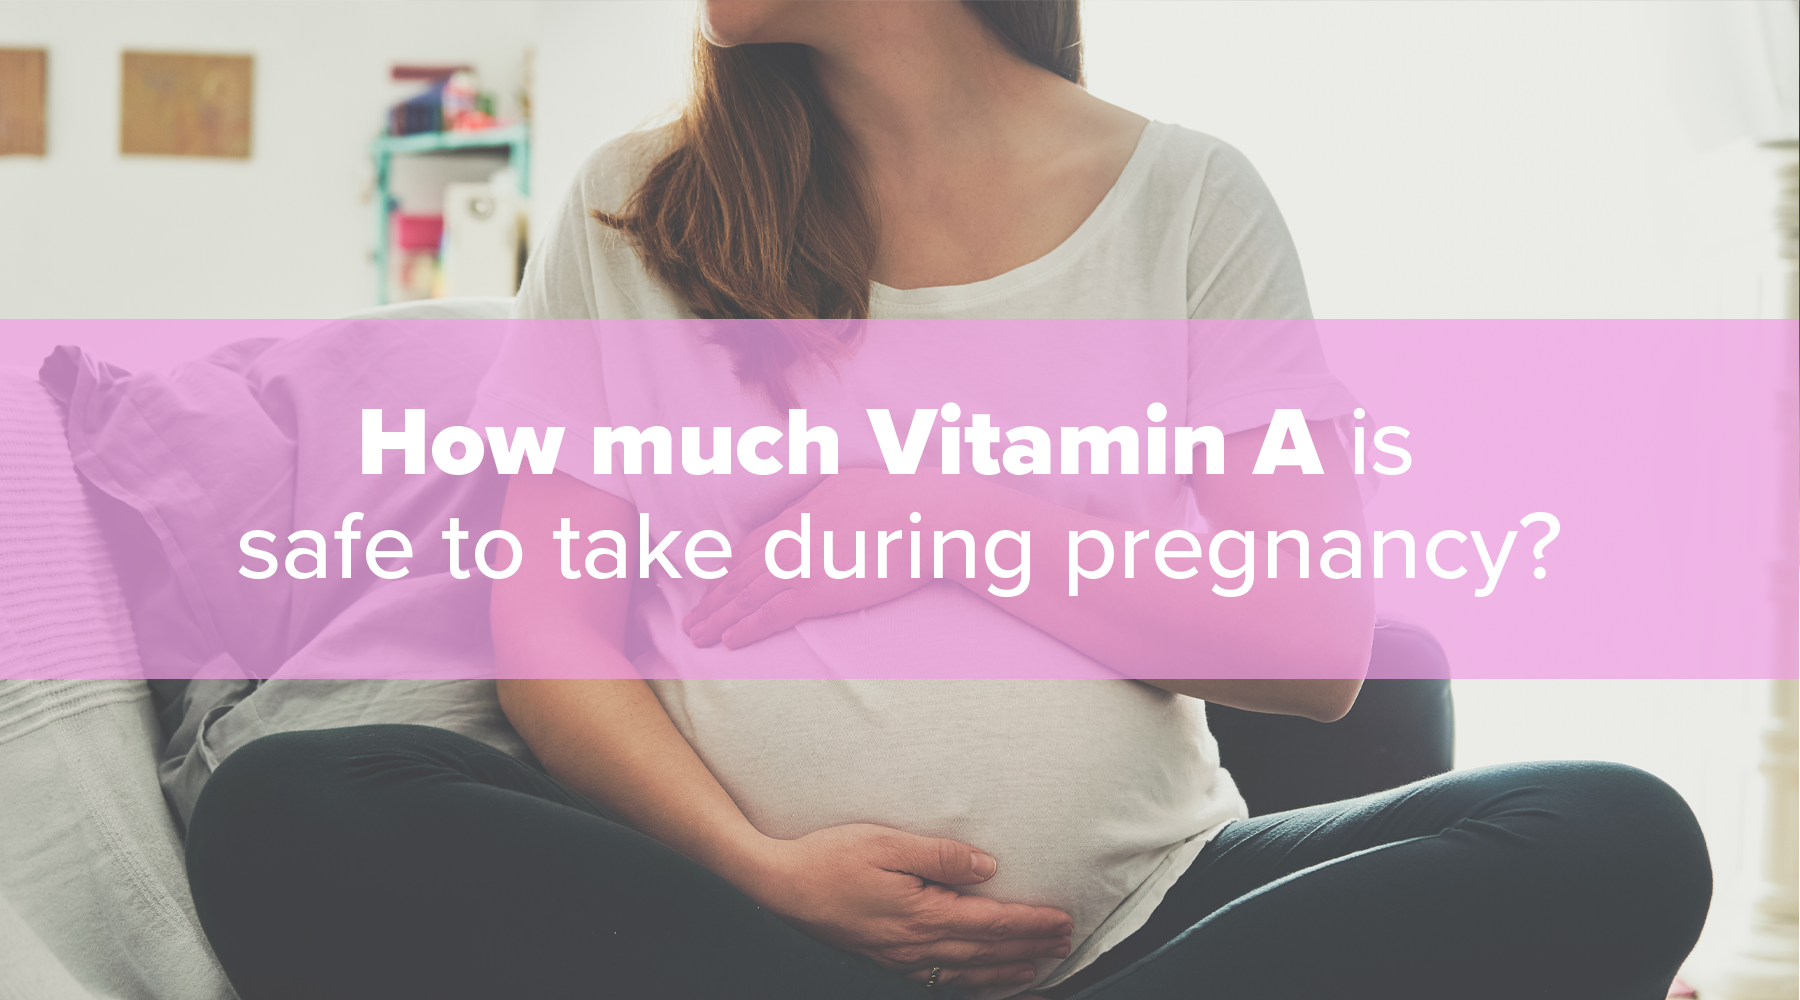 How much Vitamin A is safe to take during pregnancy?